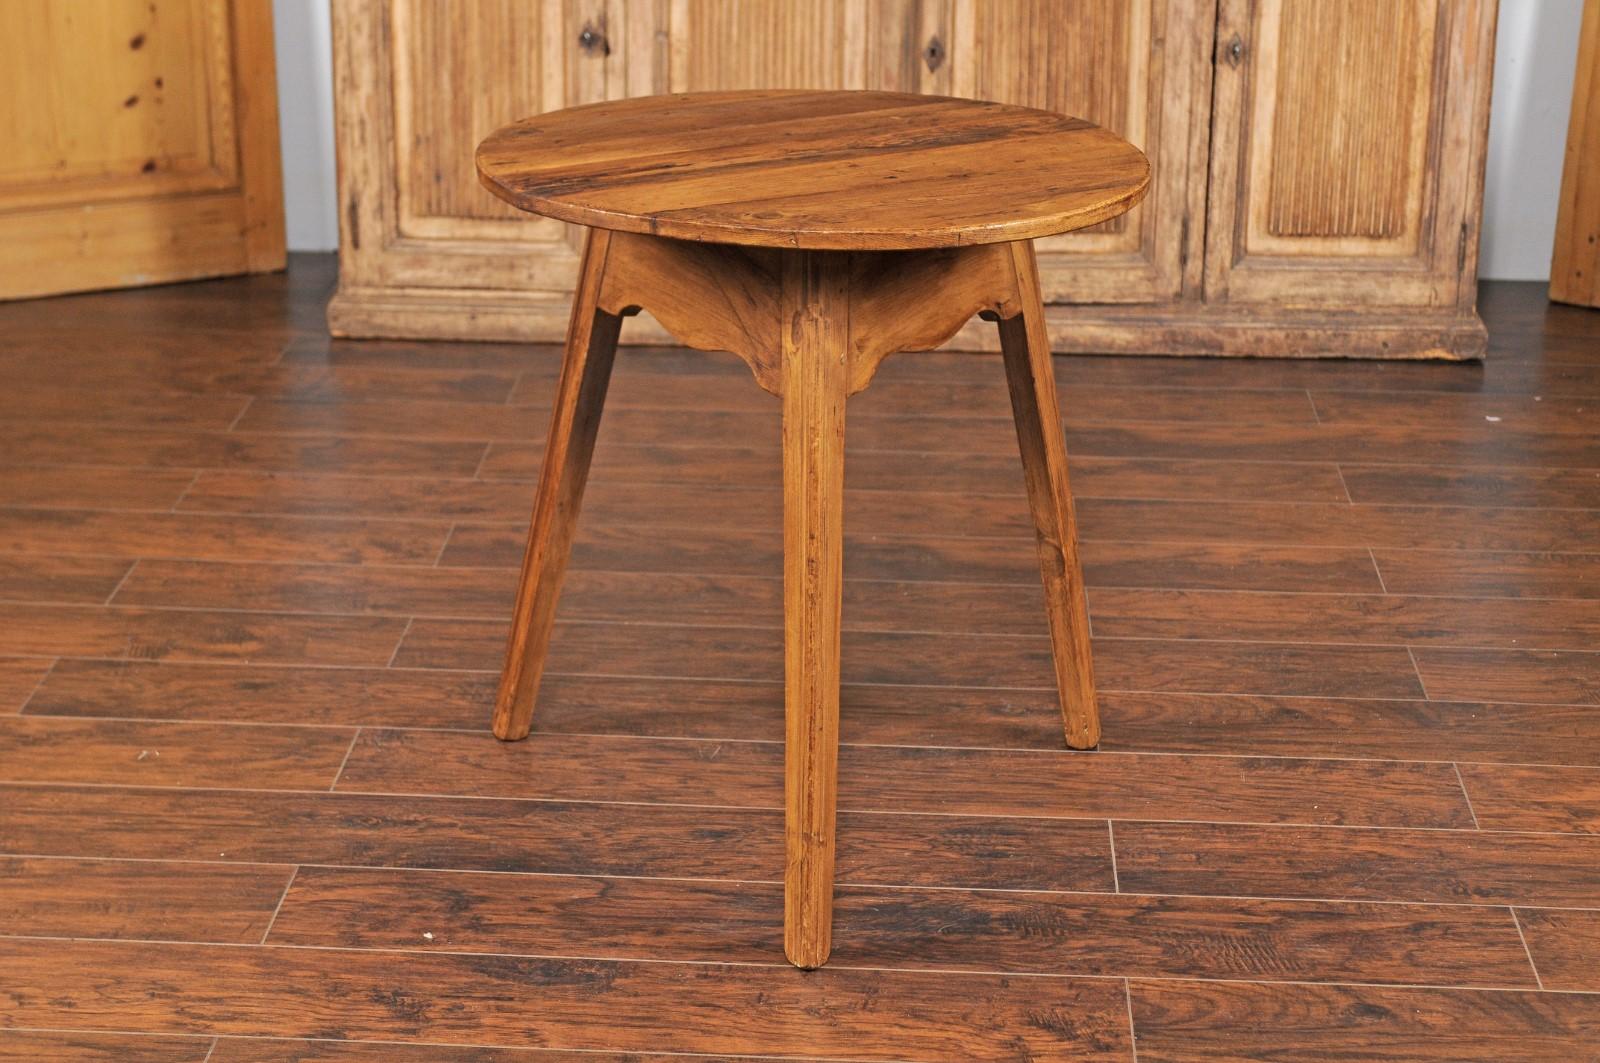 English Turn of the Century Pine Cricket Table with Scalloped Apron, circa 1900 For Sale 3